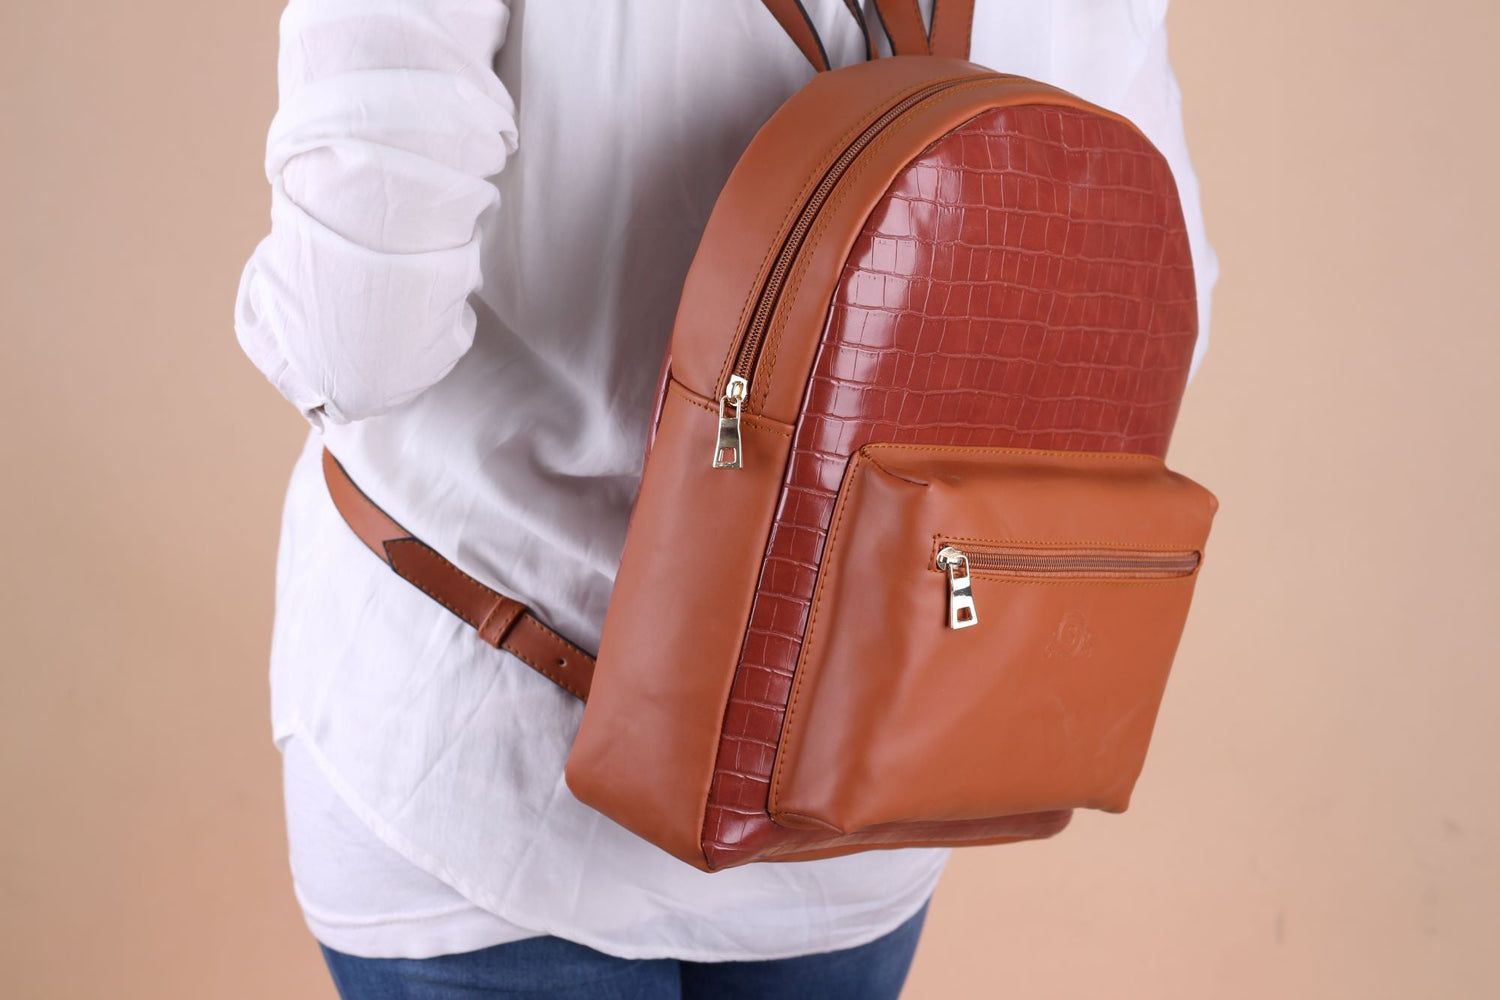 Havana leather women's backpack, light and comfortable, with a suitable size and price from Shoppingooo